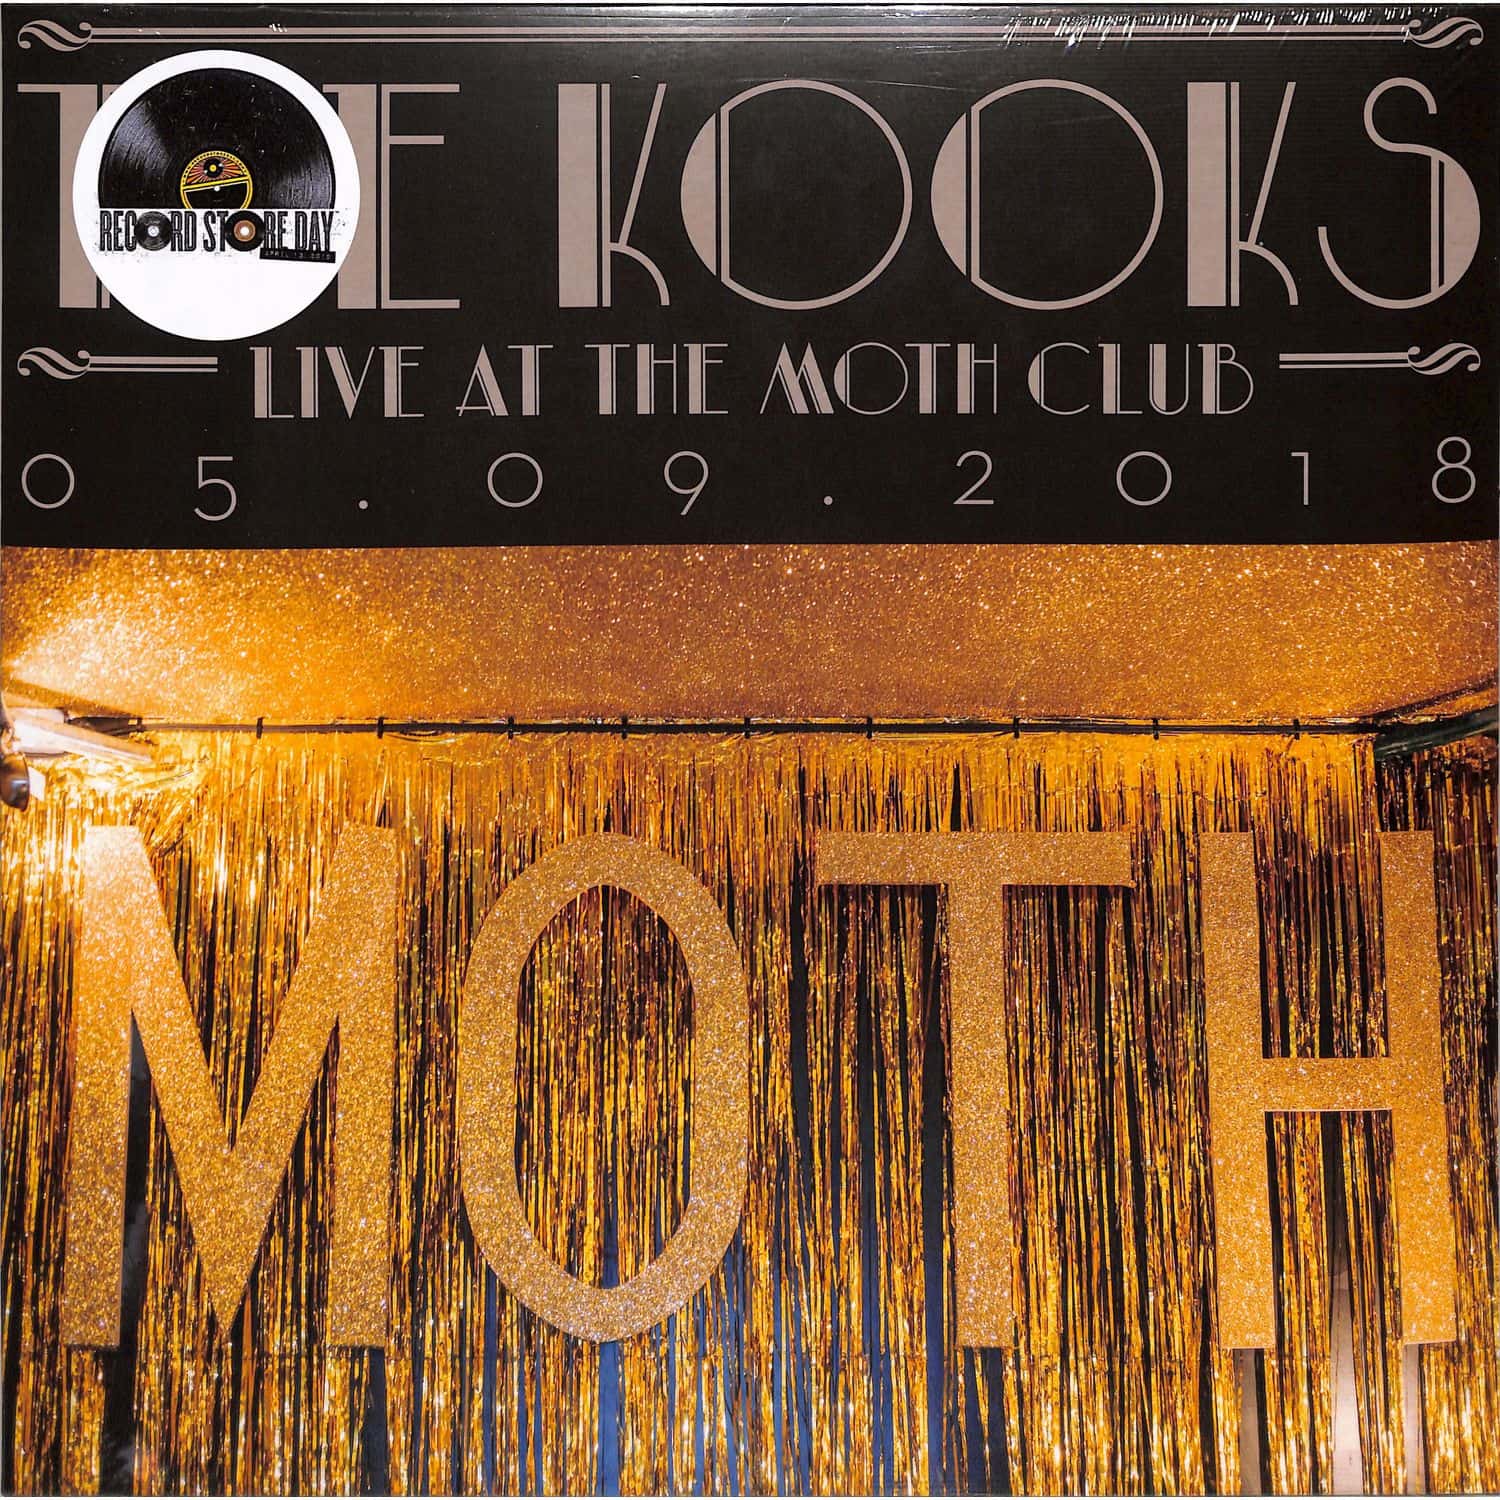 The Kooks - LIVE AT THE MOTH CLUB - 05.09.2018